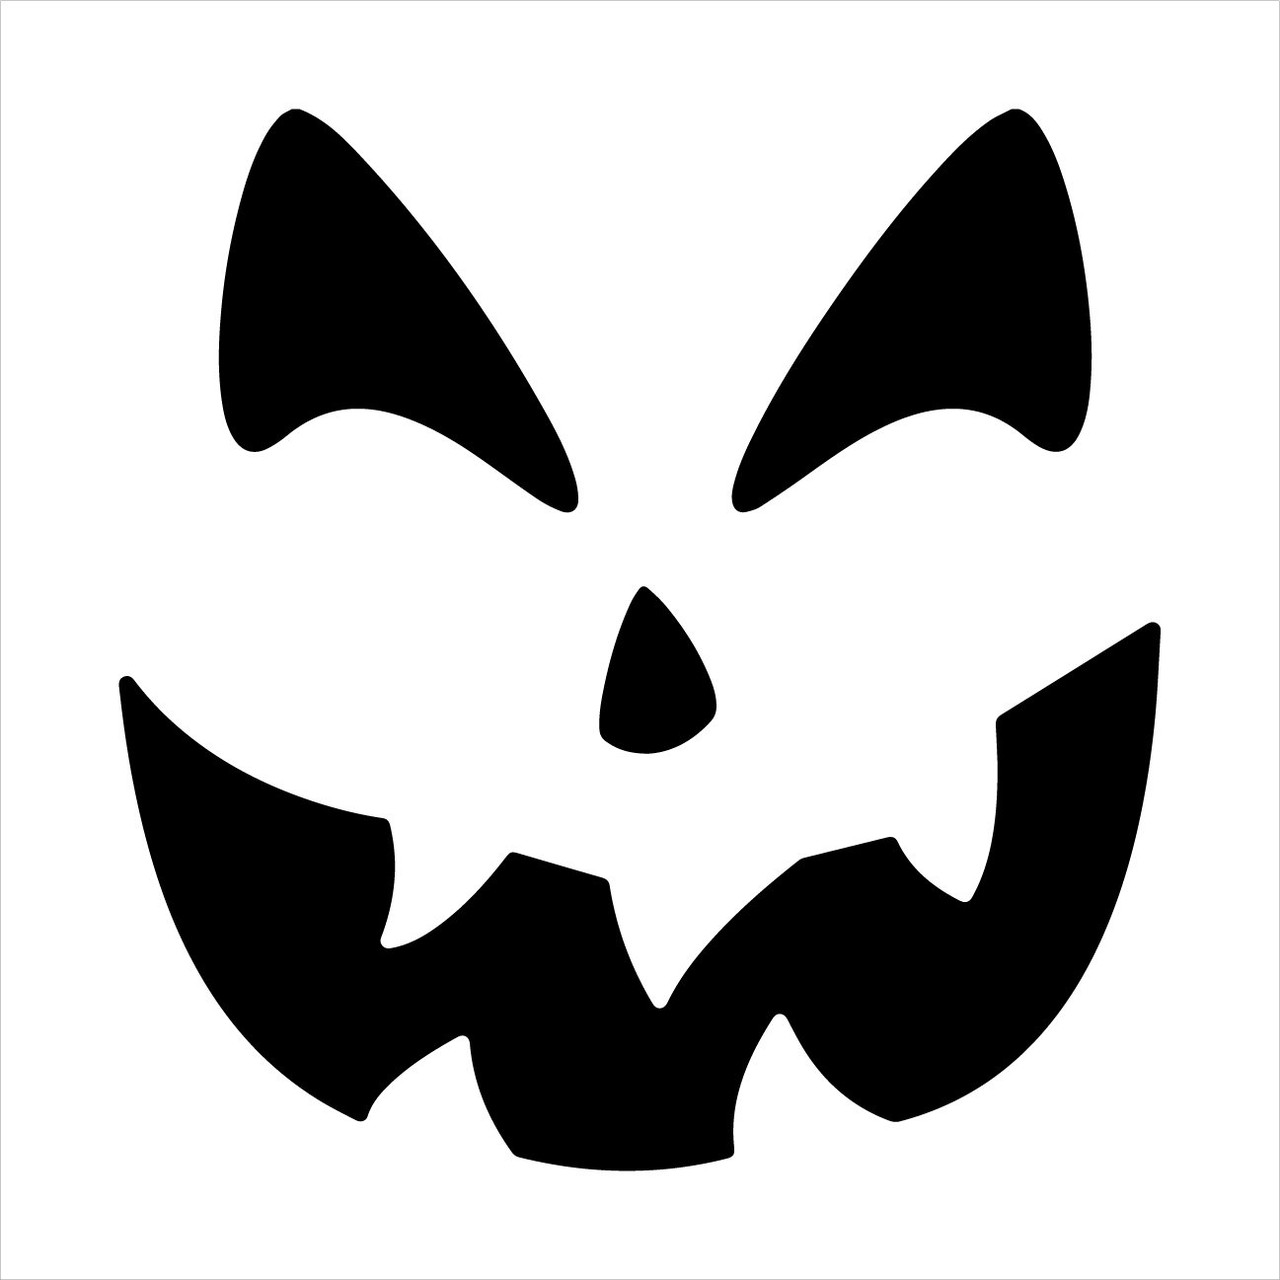 Spooky Laughing Jack o Lantern Face Silhouette Stencil by StudioR12 - Select Size - USA Made - Craft DIY Halloween Home Decor | Paint Autumn Wood Sign